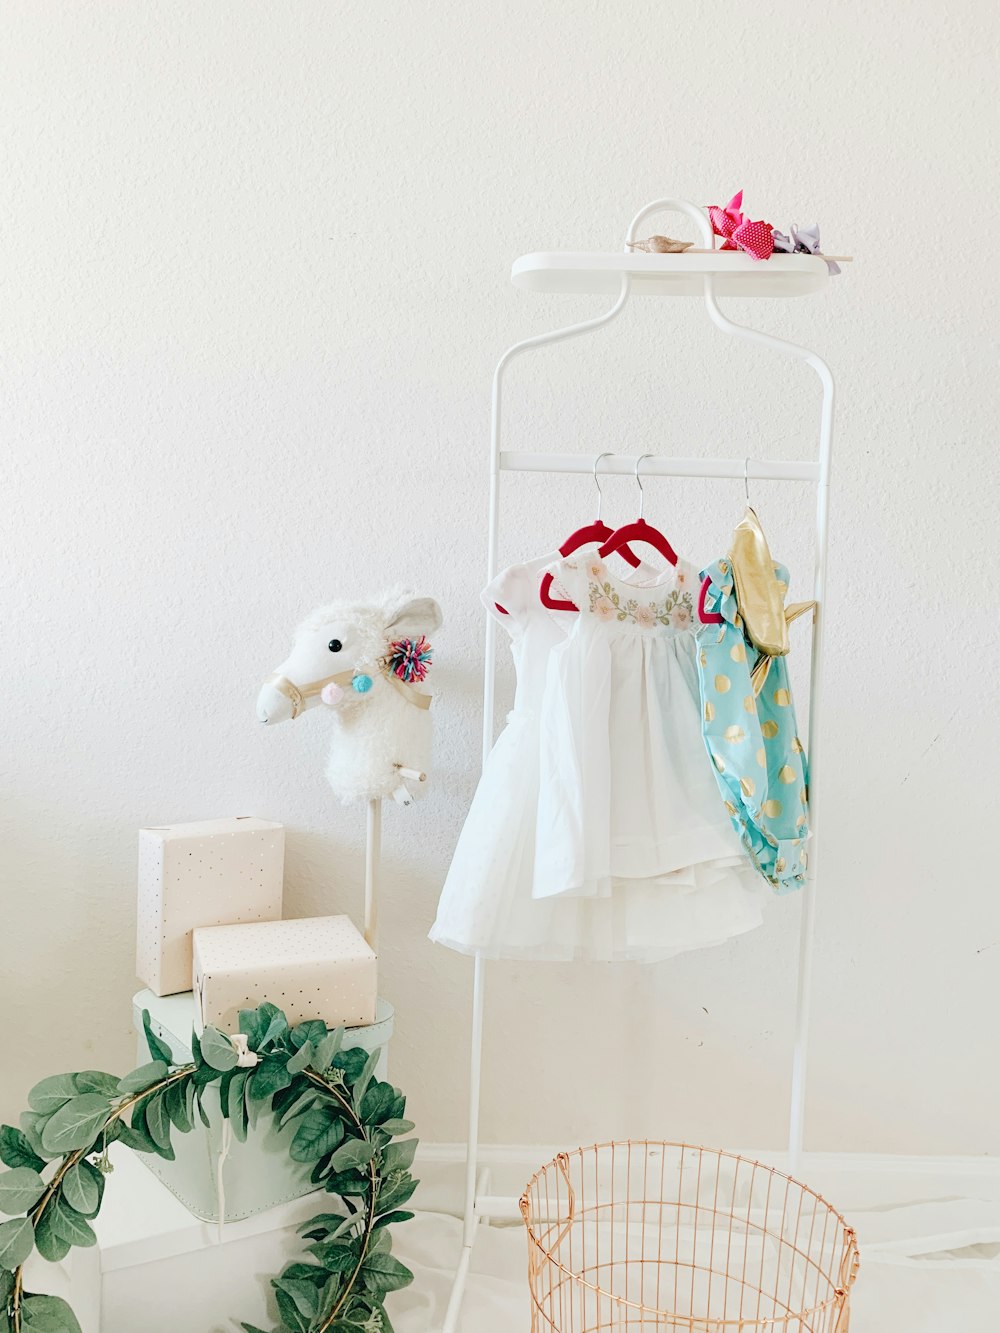 toddler's clothes hanged on rack